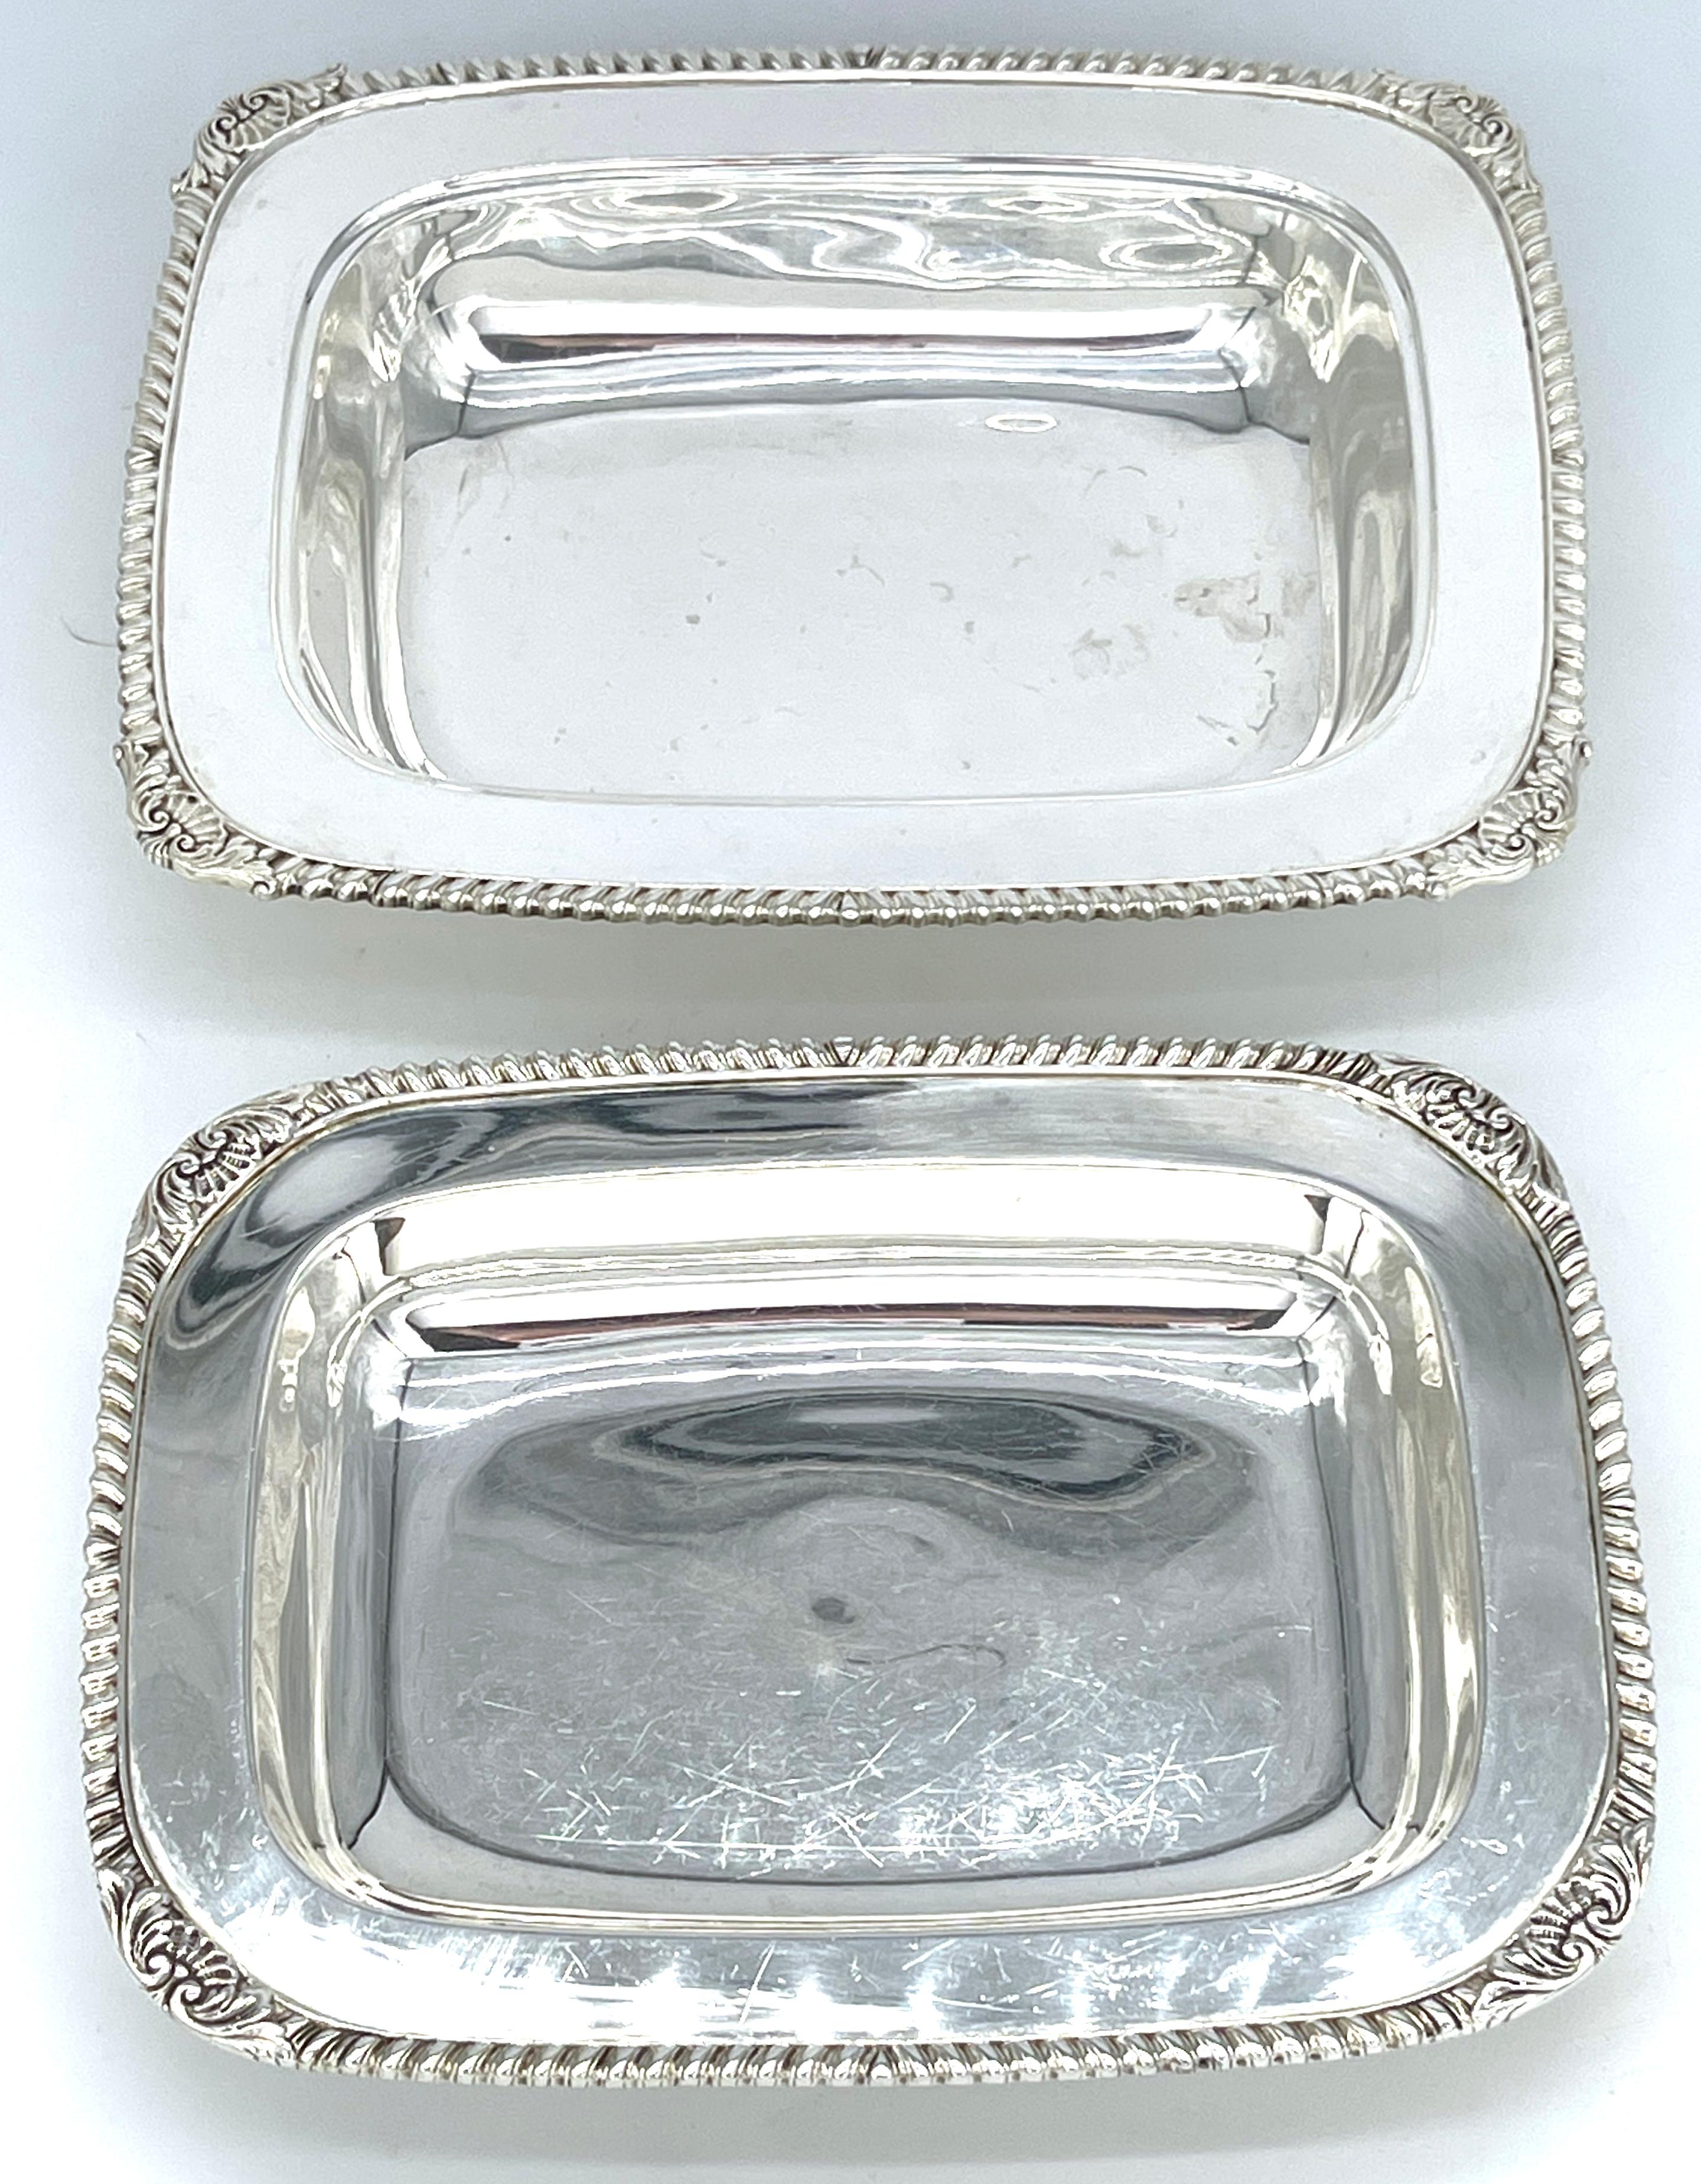 Tiffany Co. Sterling Neoclassical Interchangeable Covered Vegetable Dish/ Tureen In Good Condition For Sale In West Palm Beach, FL